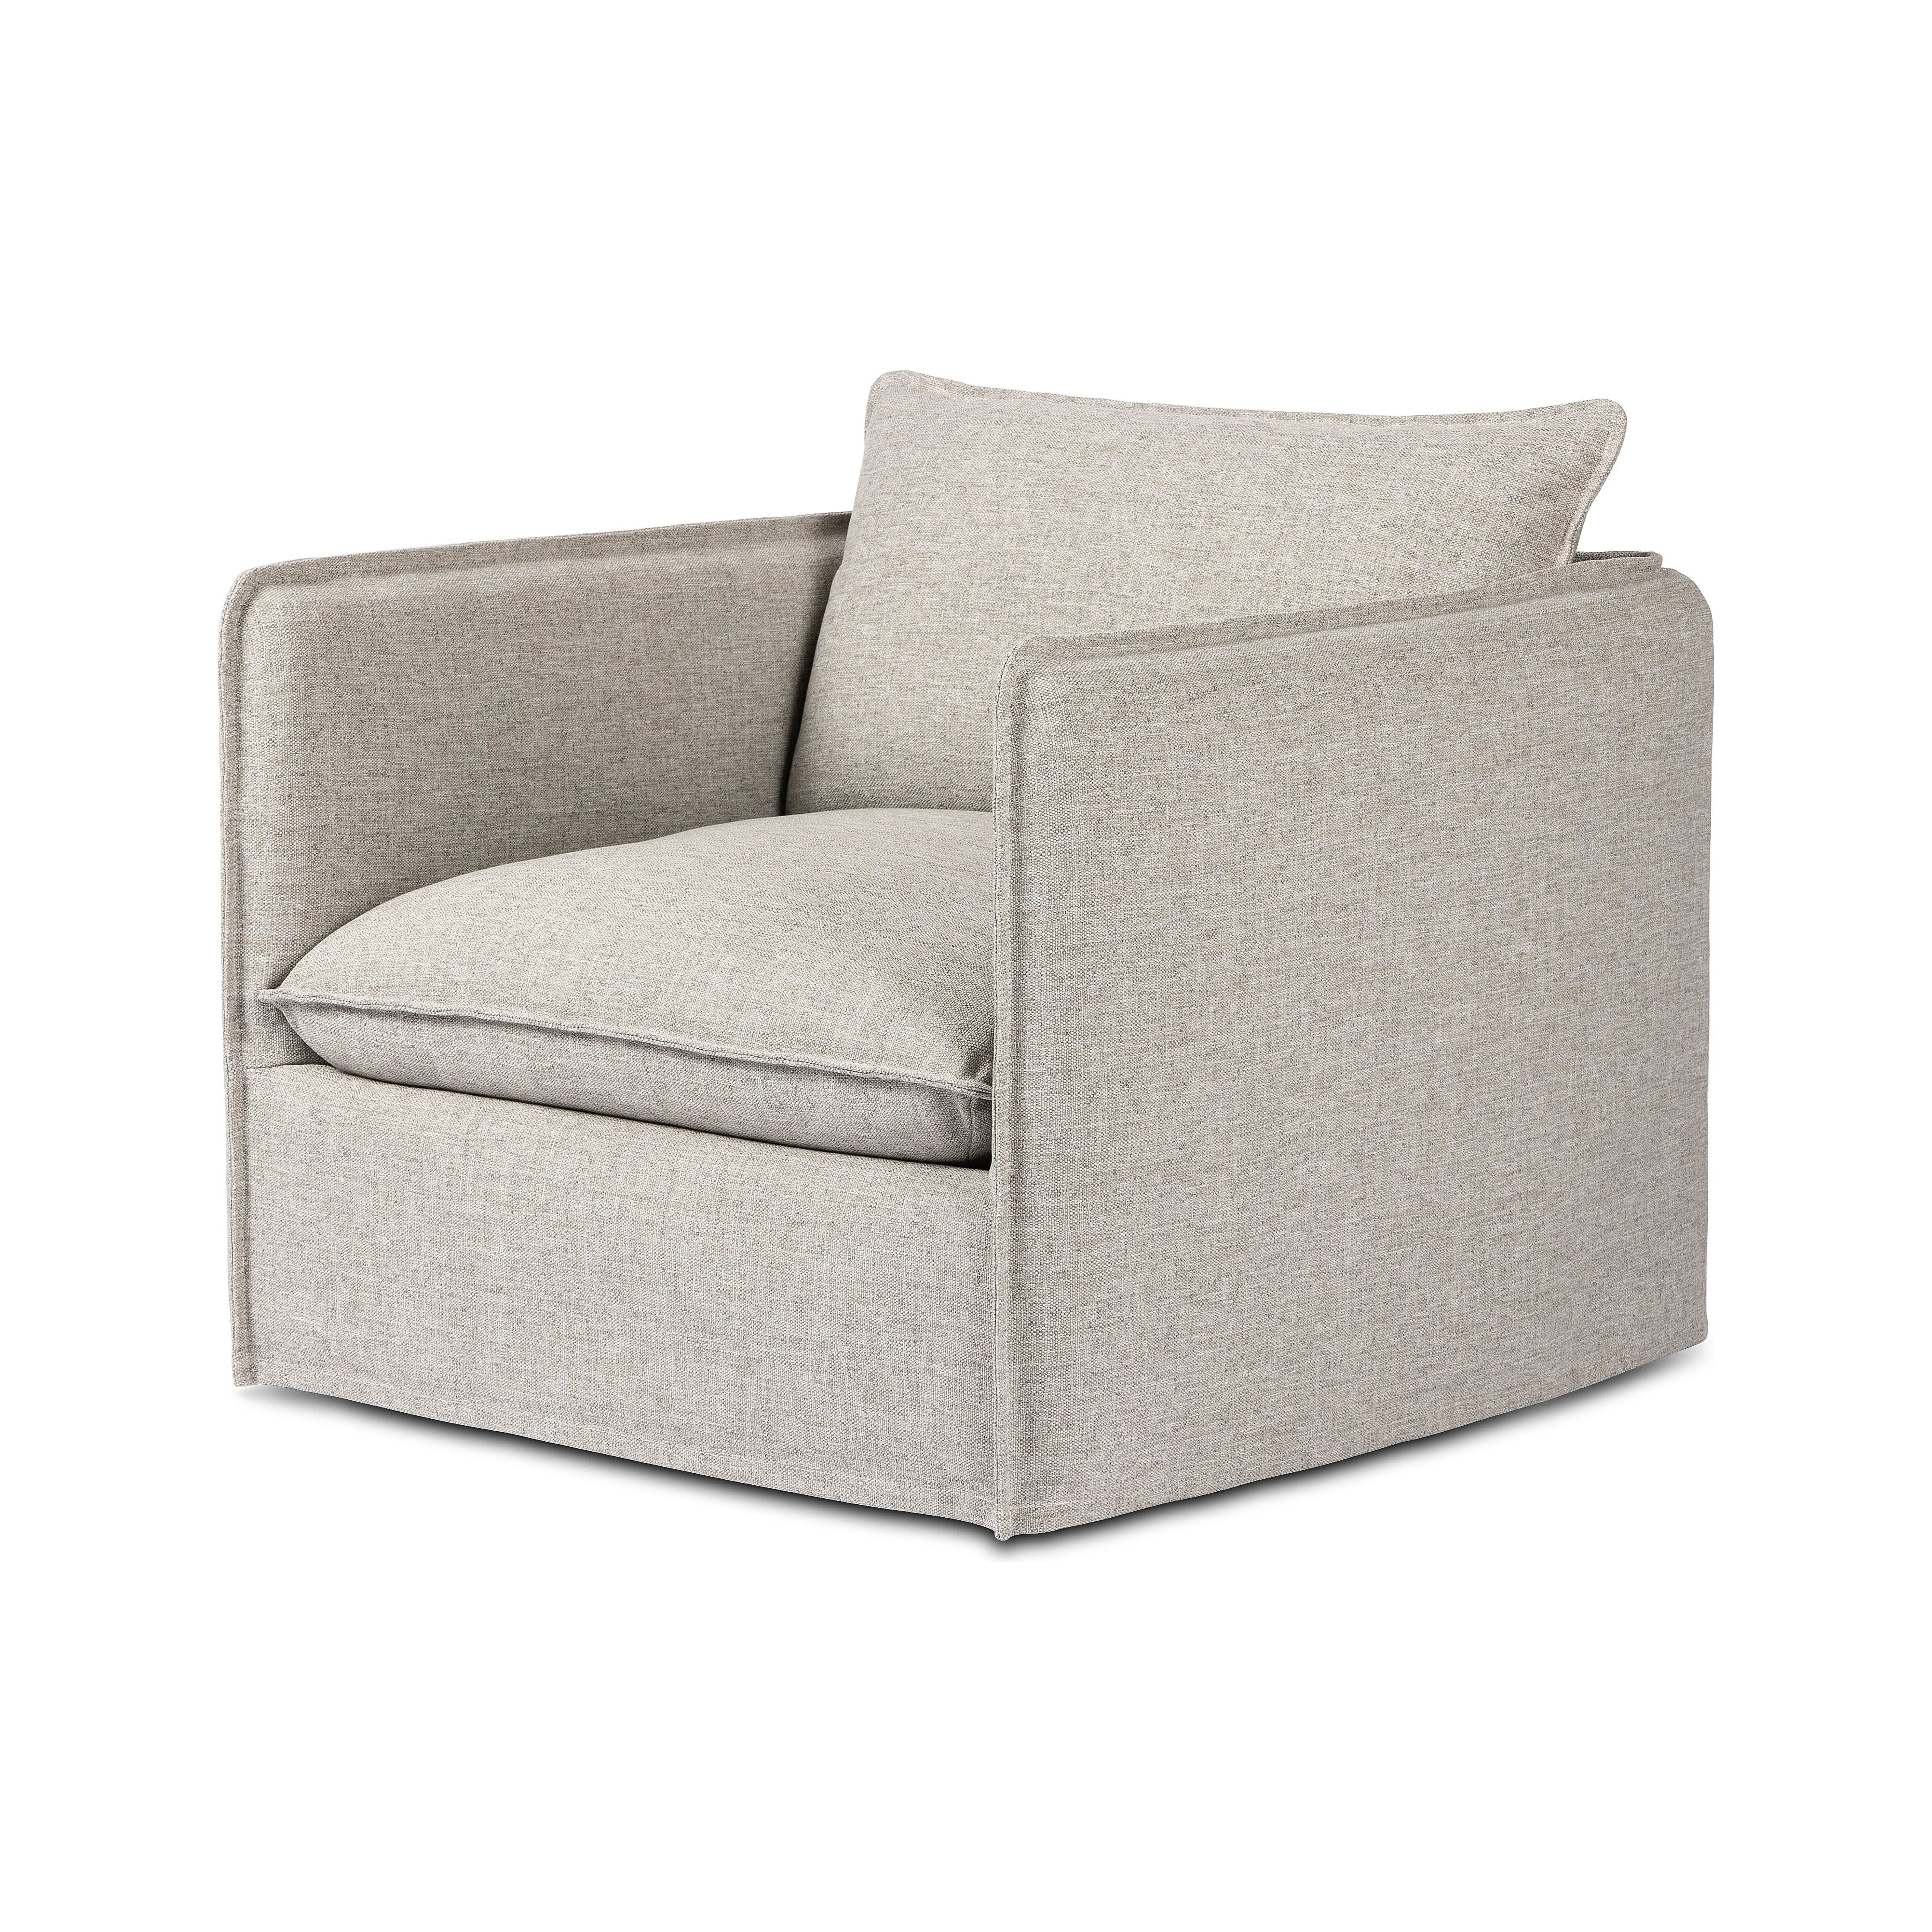 An outdoor interpretation of an indoor silhouette. This 360-degree outdoor swivel chair offers a clean, contemporary feel with relaxed casual comfort. The seat and loose back cushions feature removable, washable slipcovers with a simple flange detail. Amethyst Home provides interior design, new home construction design consulting, vintage area rugs, and lighting in the Omaha metro area.